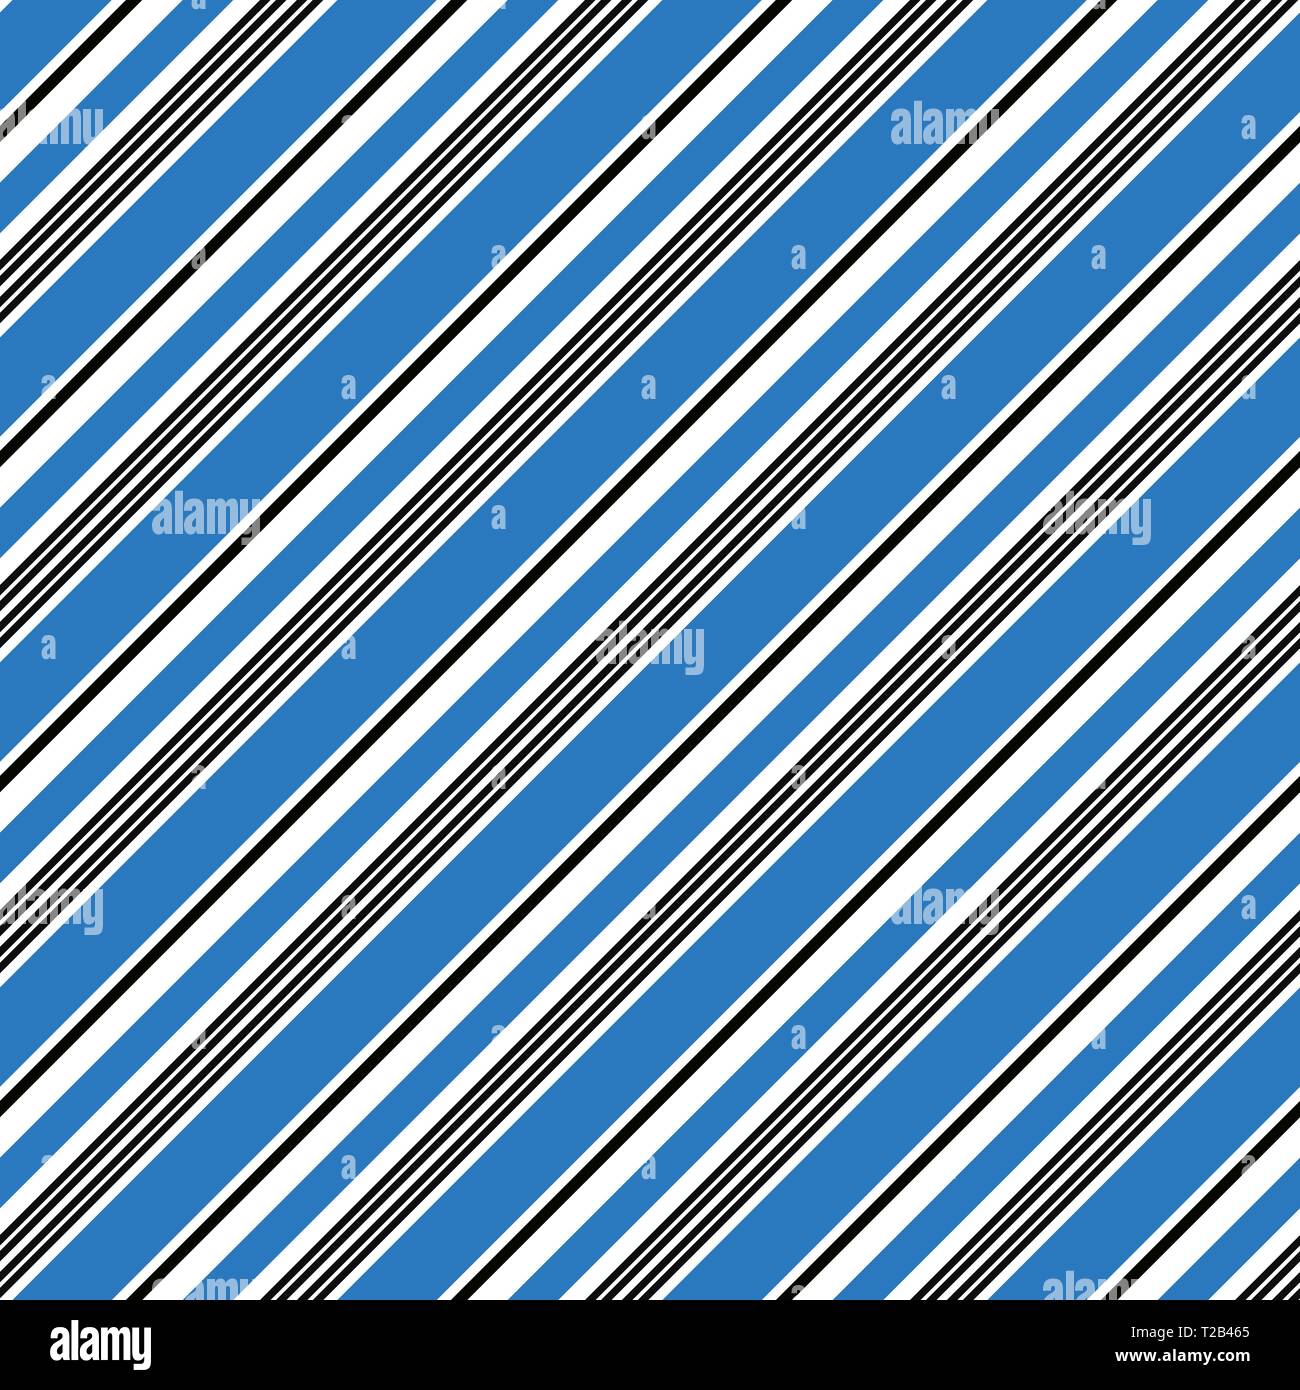 Retro Stripe Pattern With Navy Blue White And Black